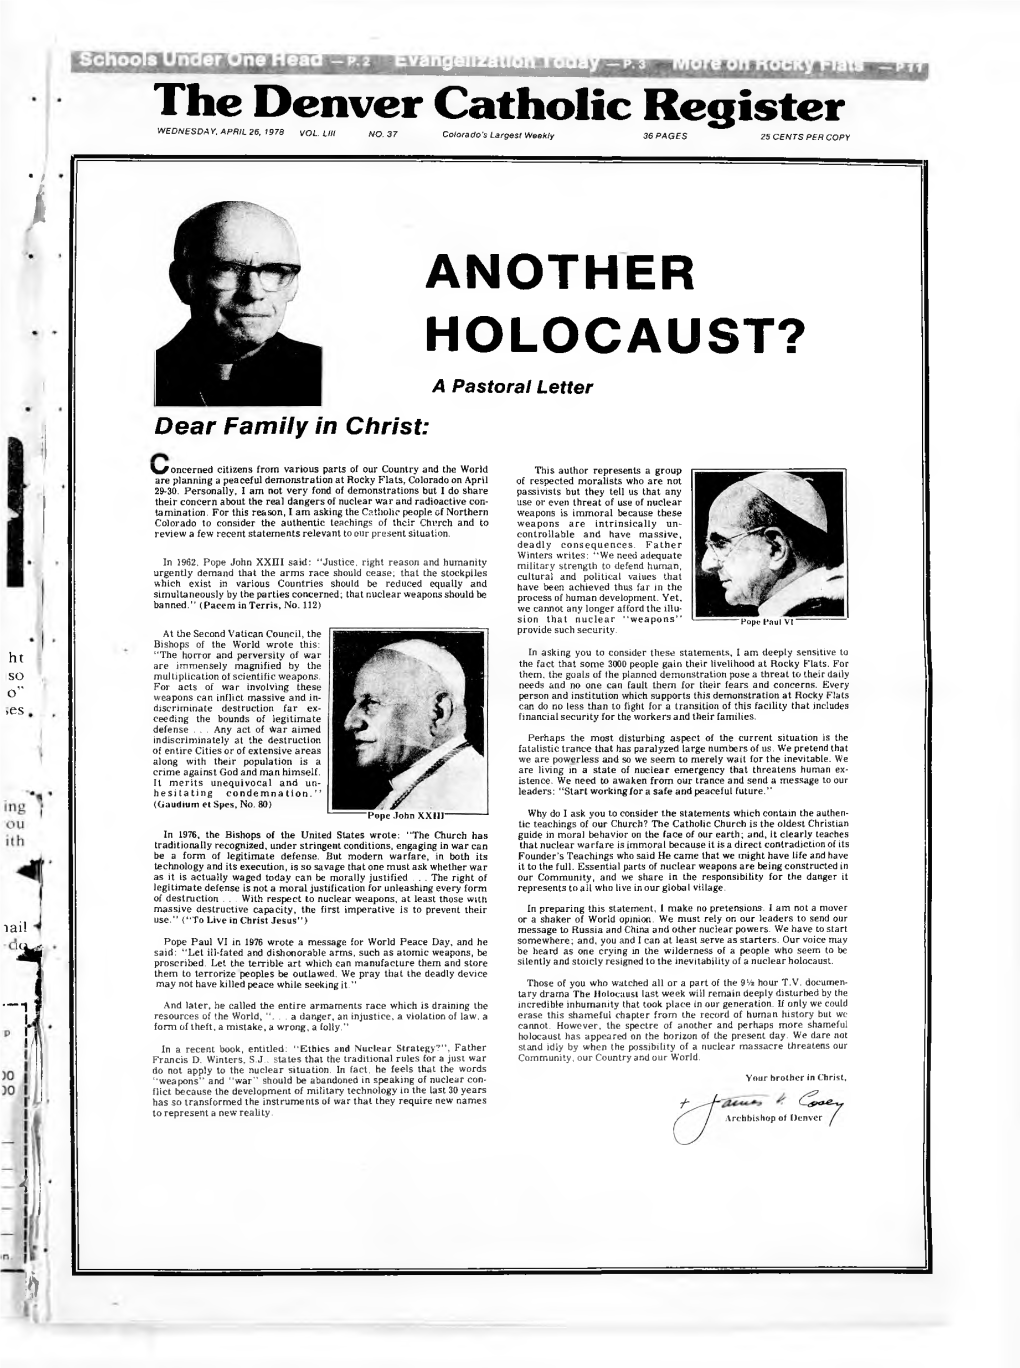 ANOTHER HOLOCAUST? a Pastoral Letter Dear Family in Christ